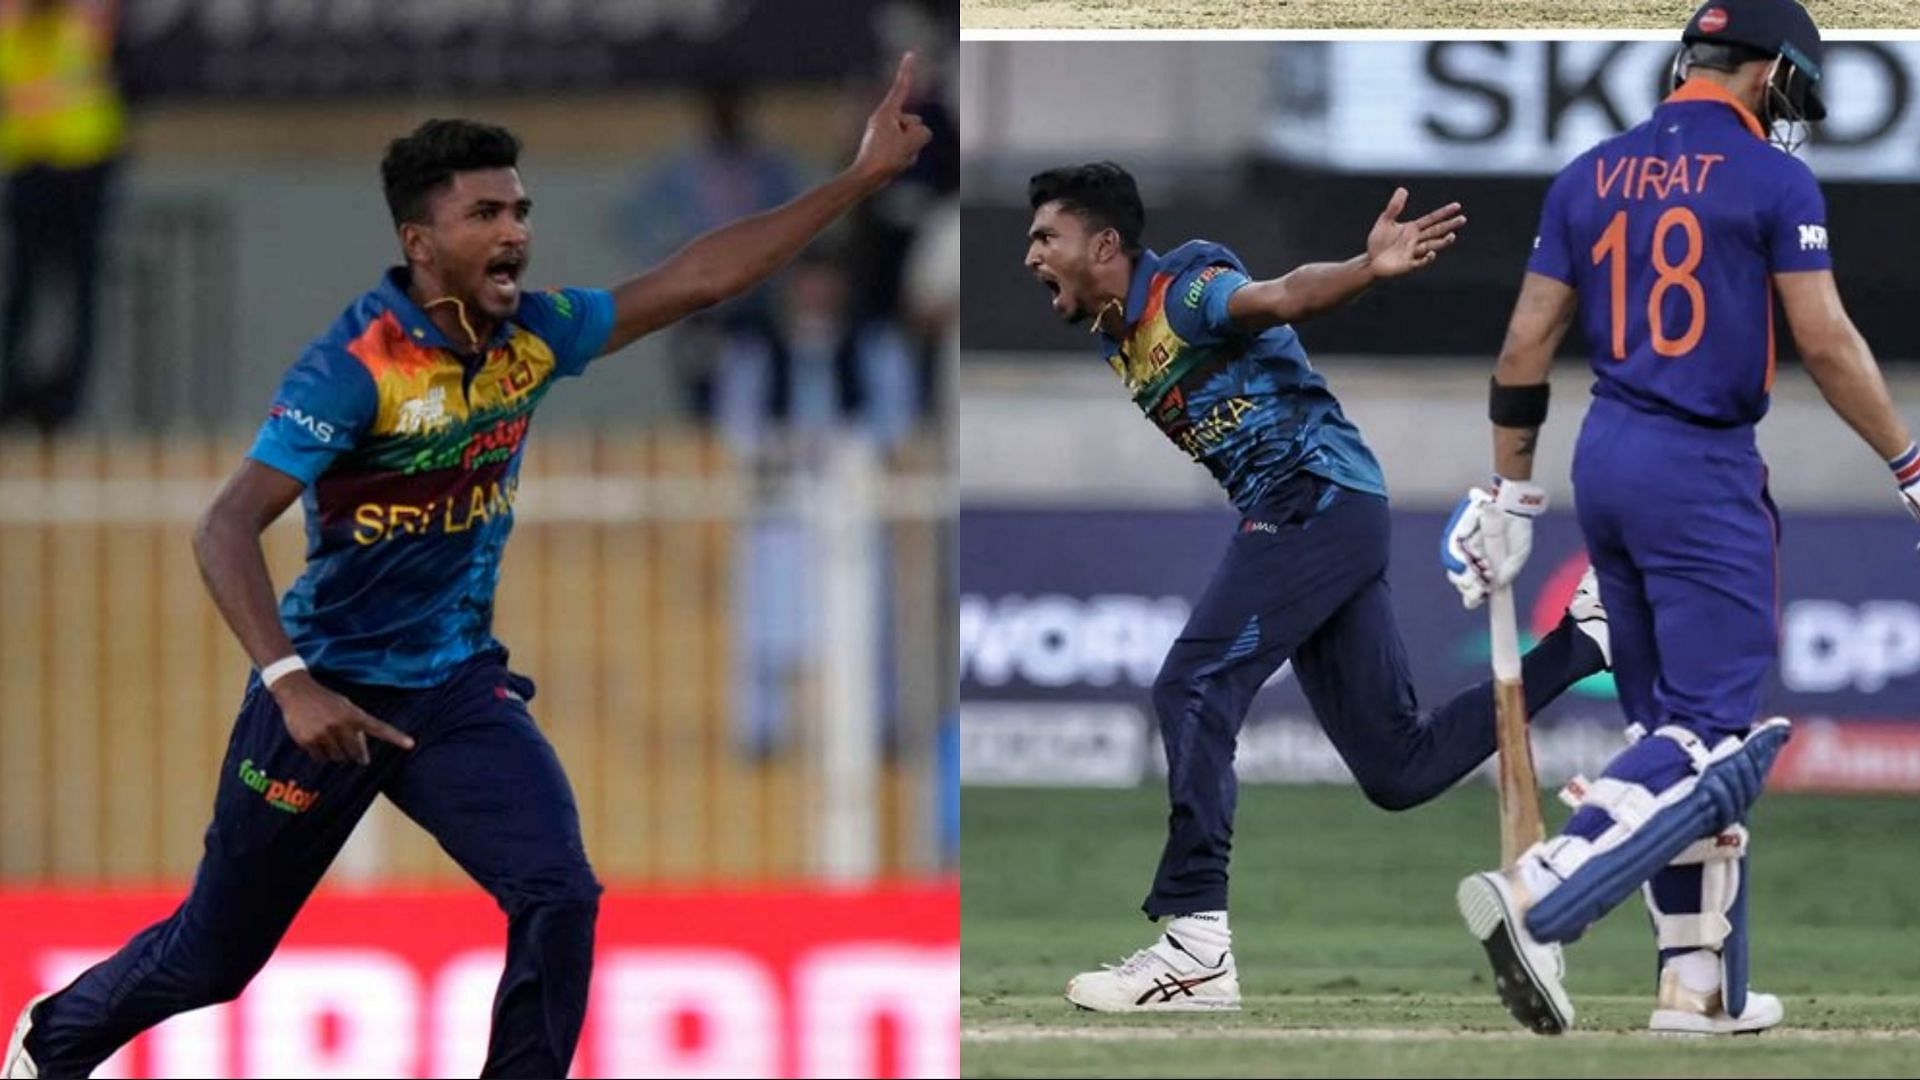 5 things you need to know about Dilshan Madushanka, the bowler who got Virat Kohli out for a duck in Asia Cup 2022